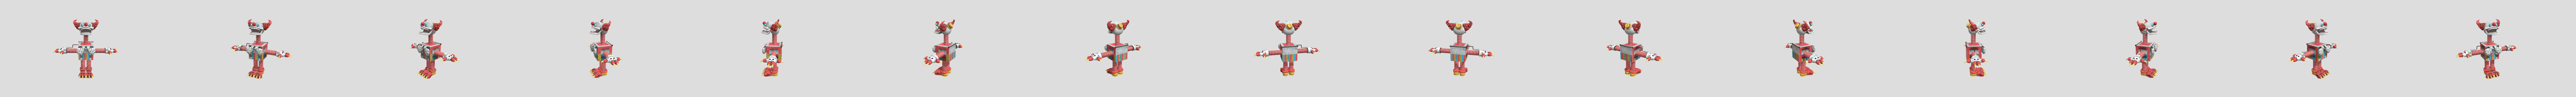 Clown Boxy Project:Playtime Phase 2 - Download Free 3D model by Stinger  Mobile [6243edf] - Sketchfab